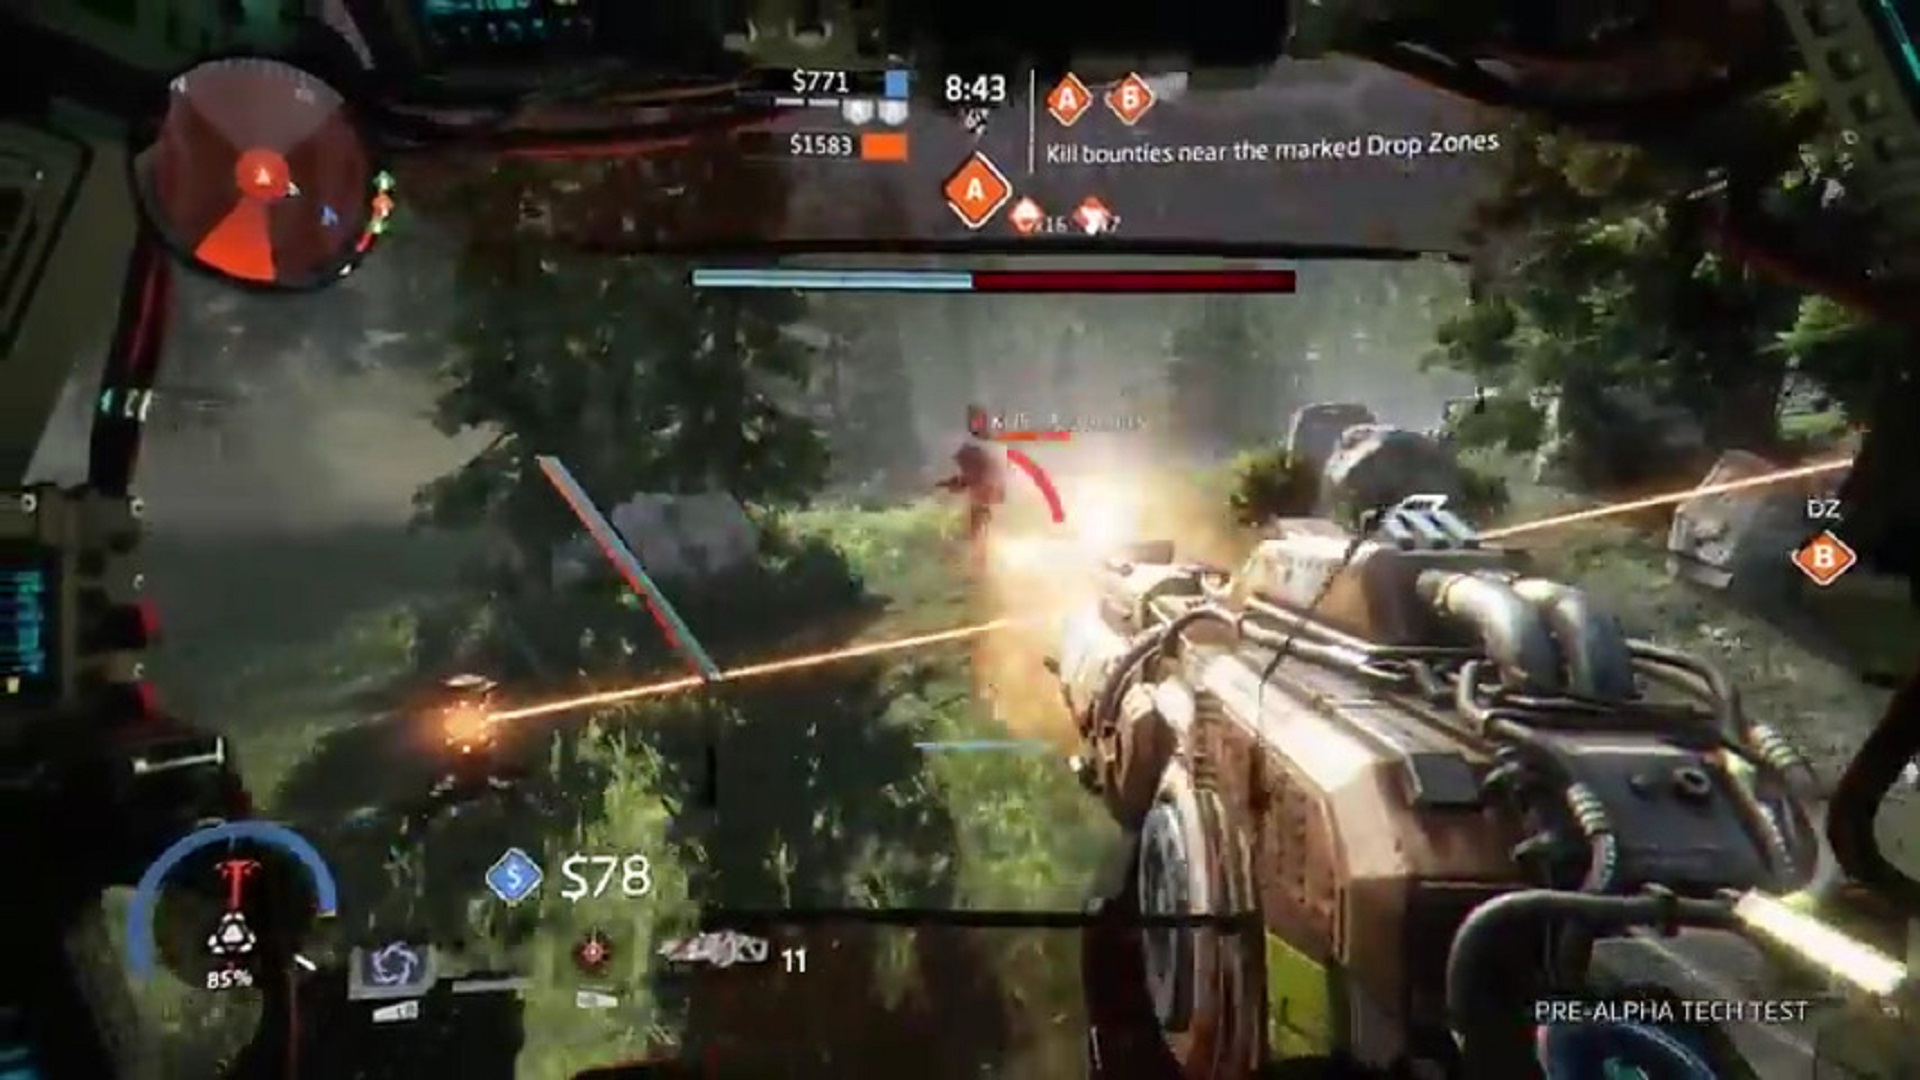 Titanfall 2 Multiplayer Hands-on Preview